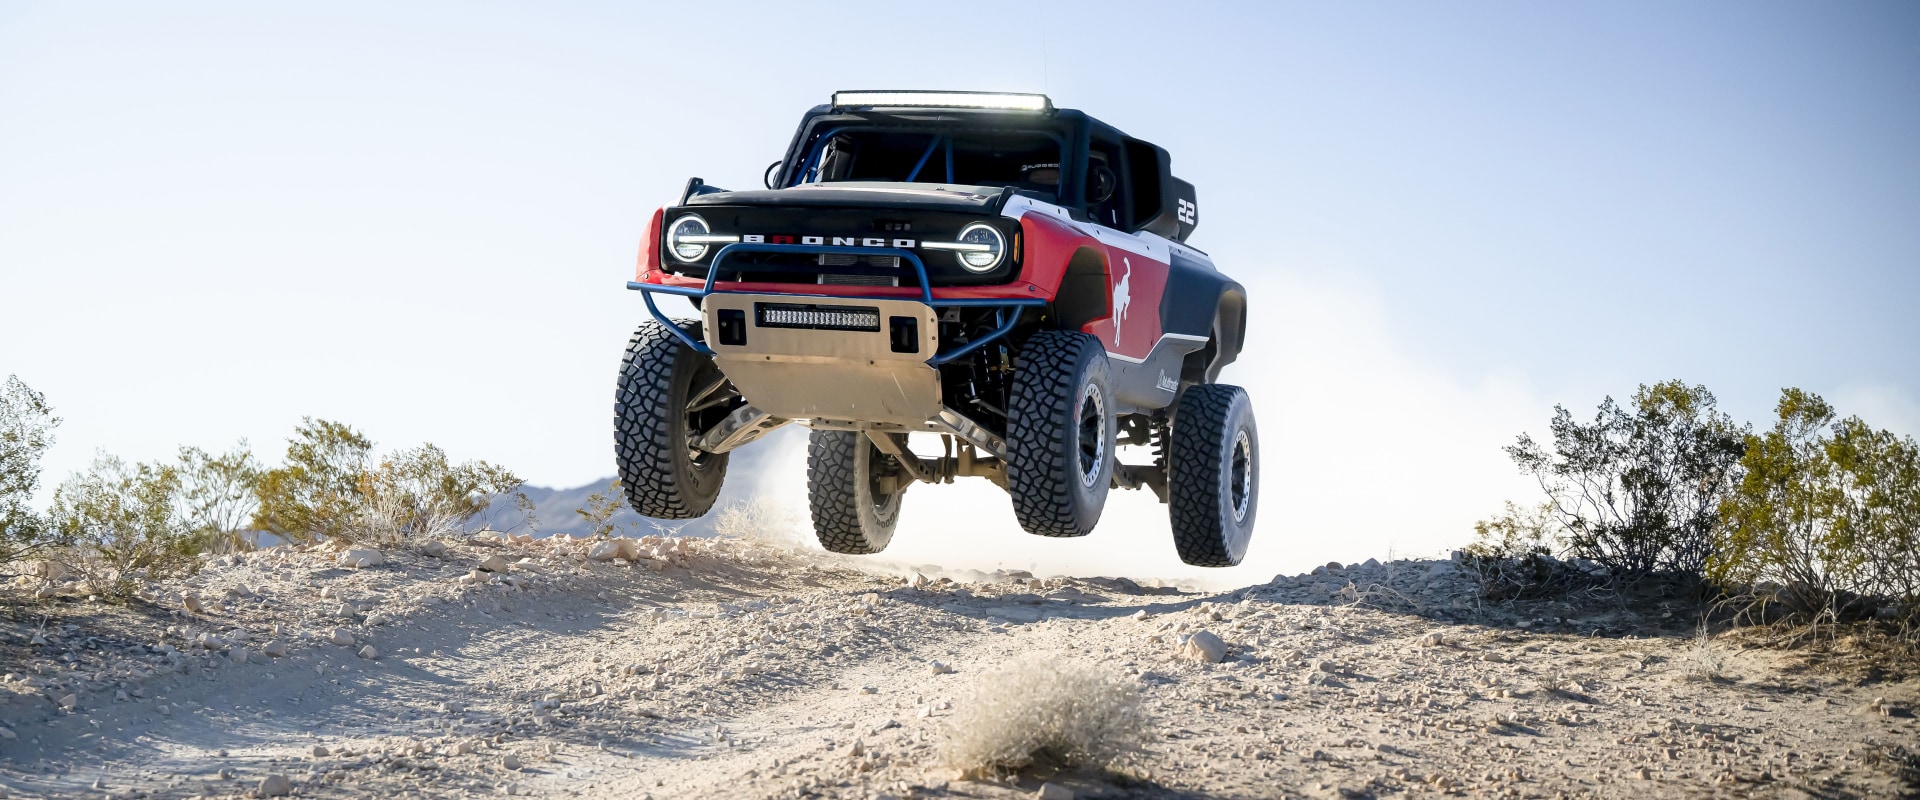 Baja 1000: The Ultimate Off-Road Racing Experience in Marin County